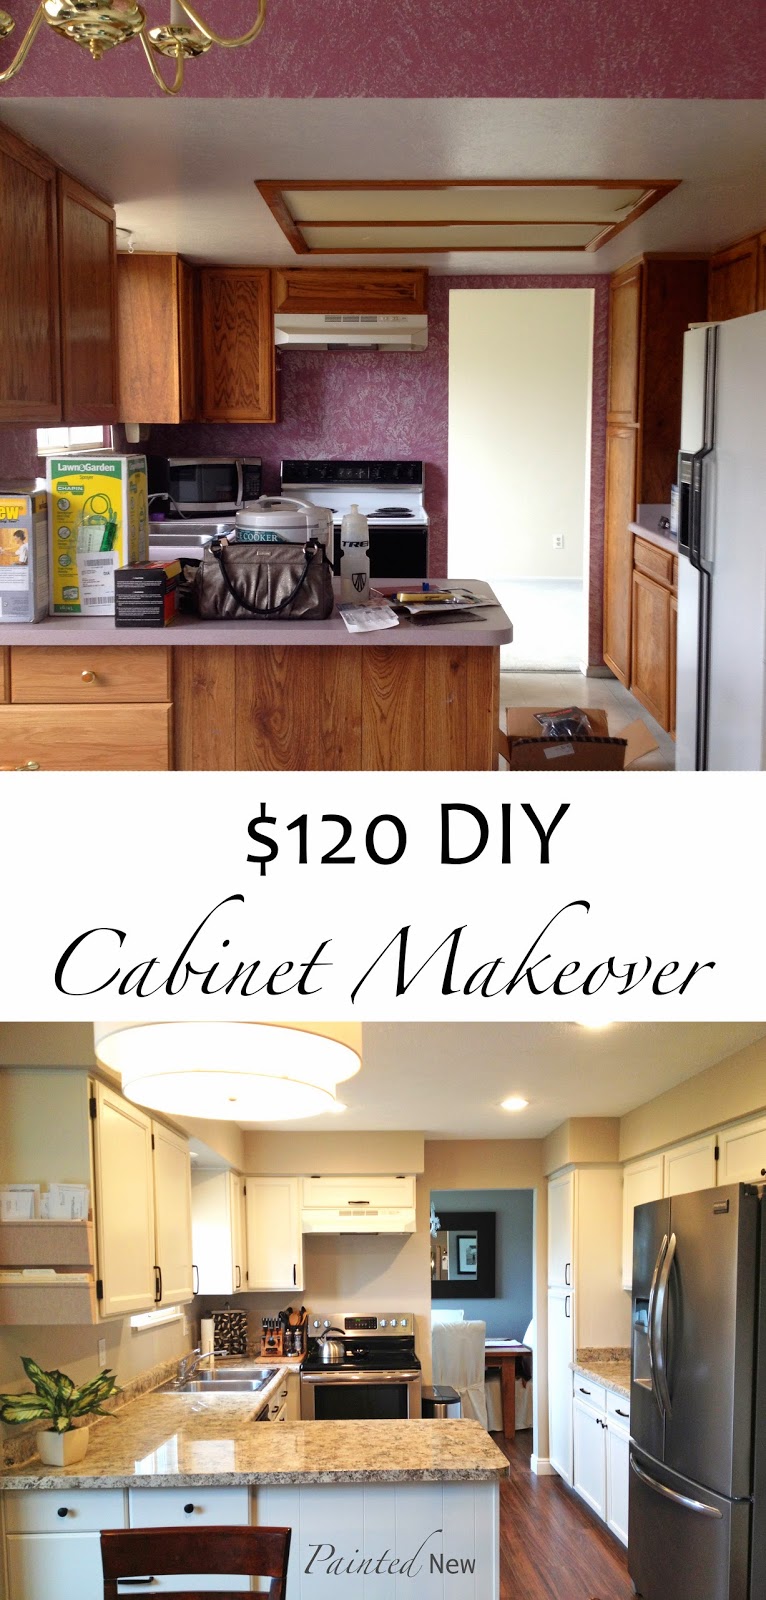 Painted New 120 Kitchen Cabinet Makeover